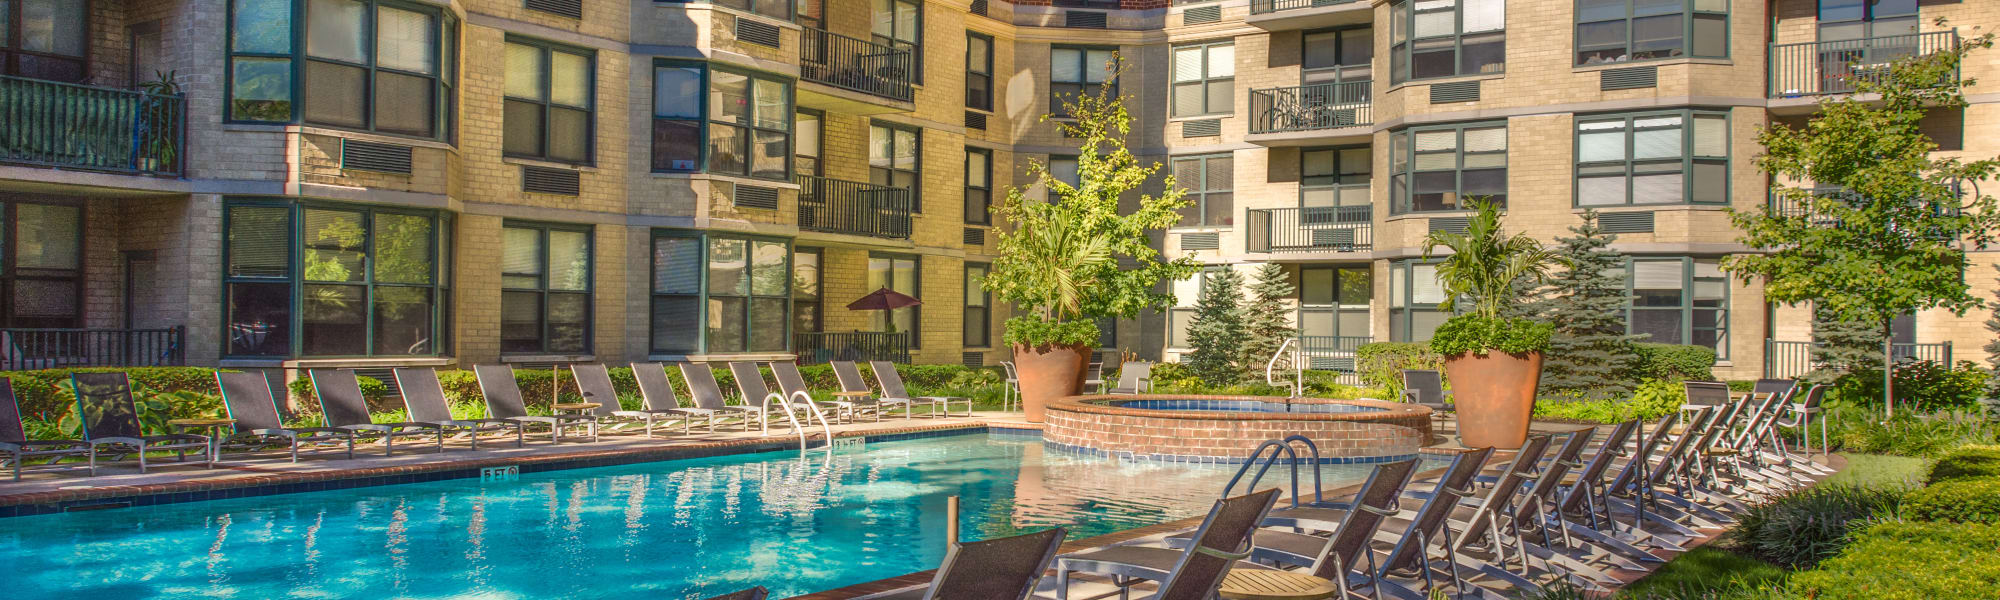 Amenities at Riverbend at Port Imperial in West New York, New Jersey